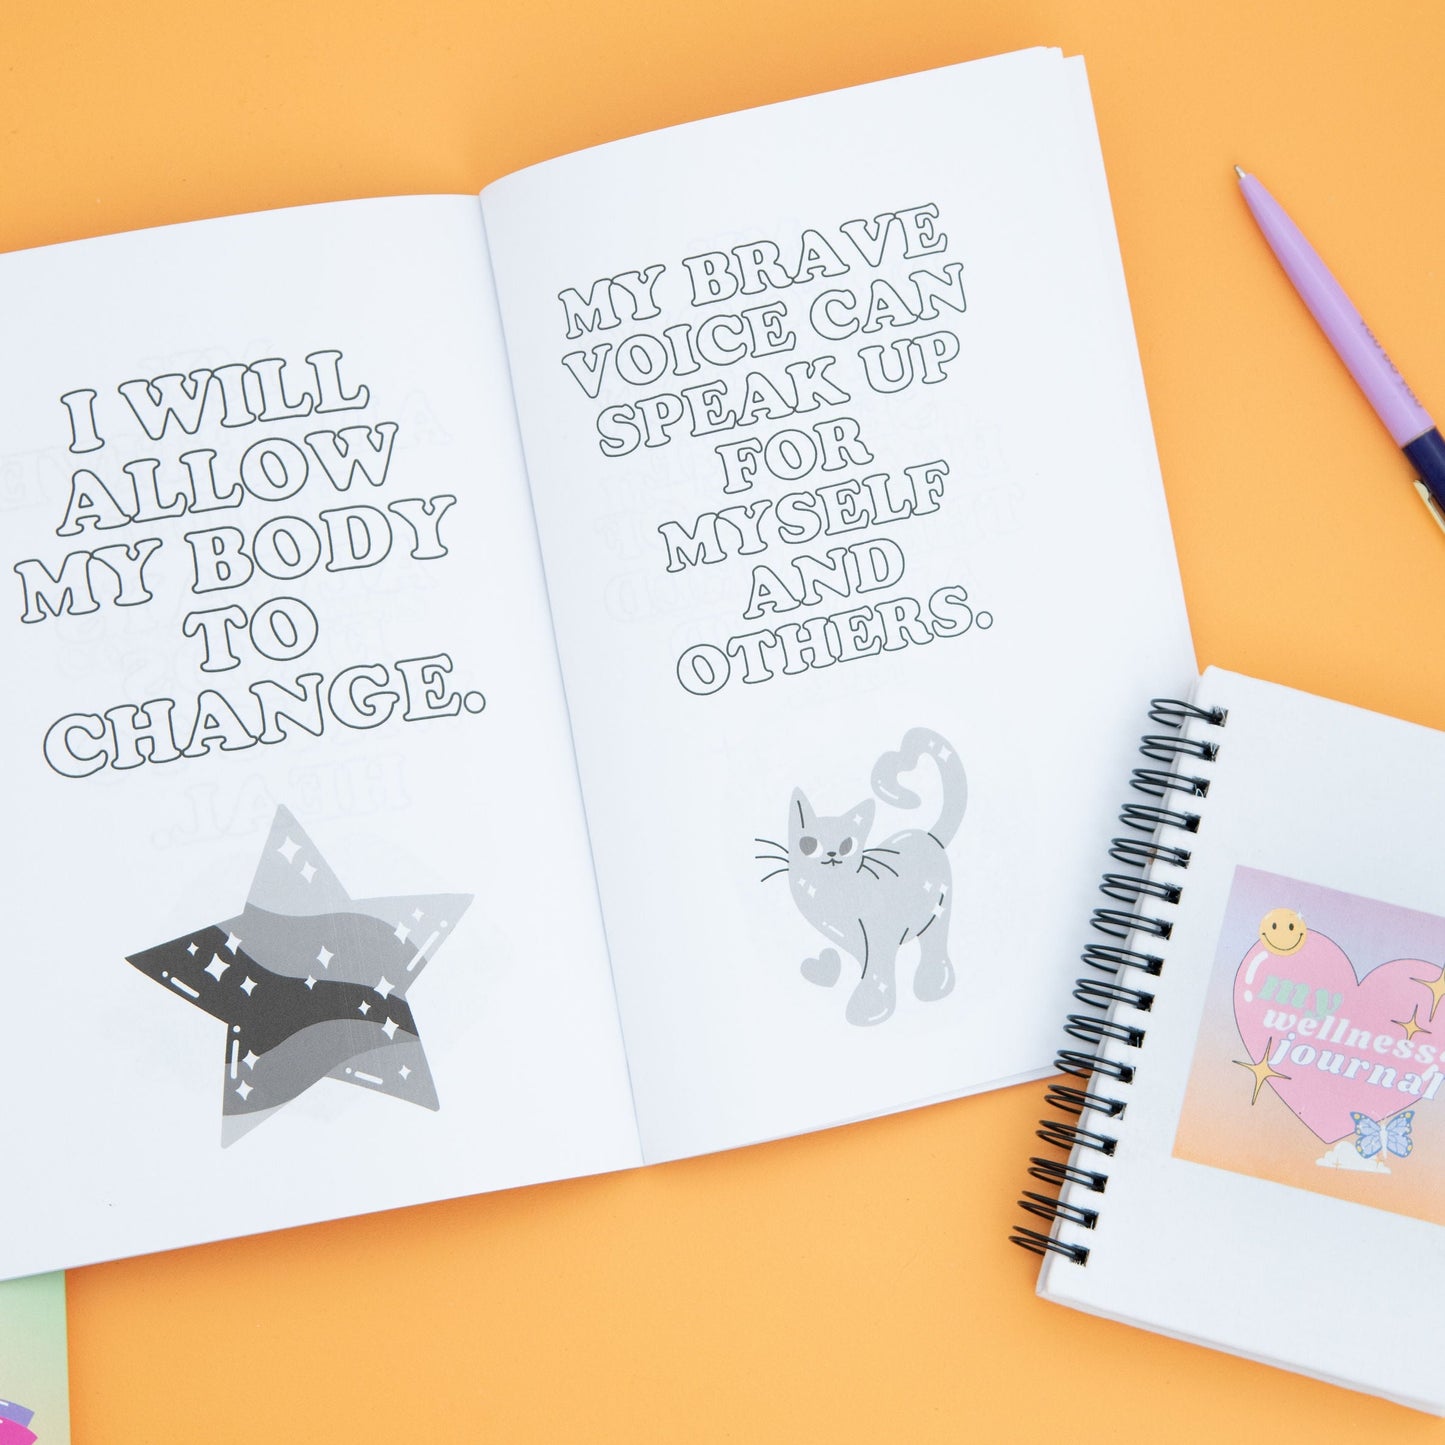 A positive body affirmation book with black and white star graphic on one page and a black and white cat on the other, next to a ballpoint pen and a spiral-bound white notebook with heart art cover labeled 'My Wellness Journal.' The perfect stationary for practicing body positivity and self-care.